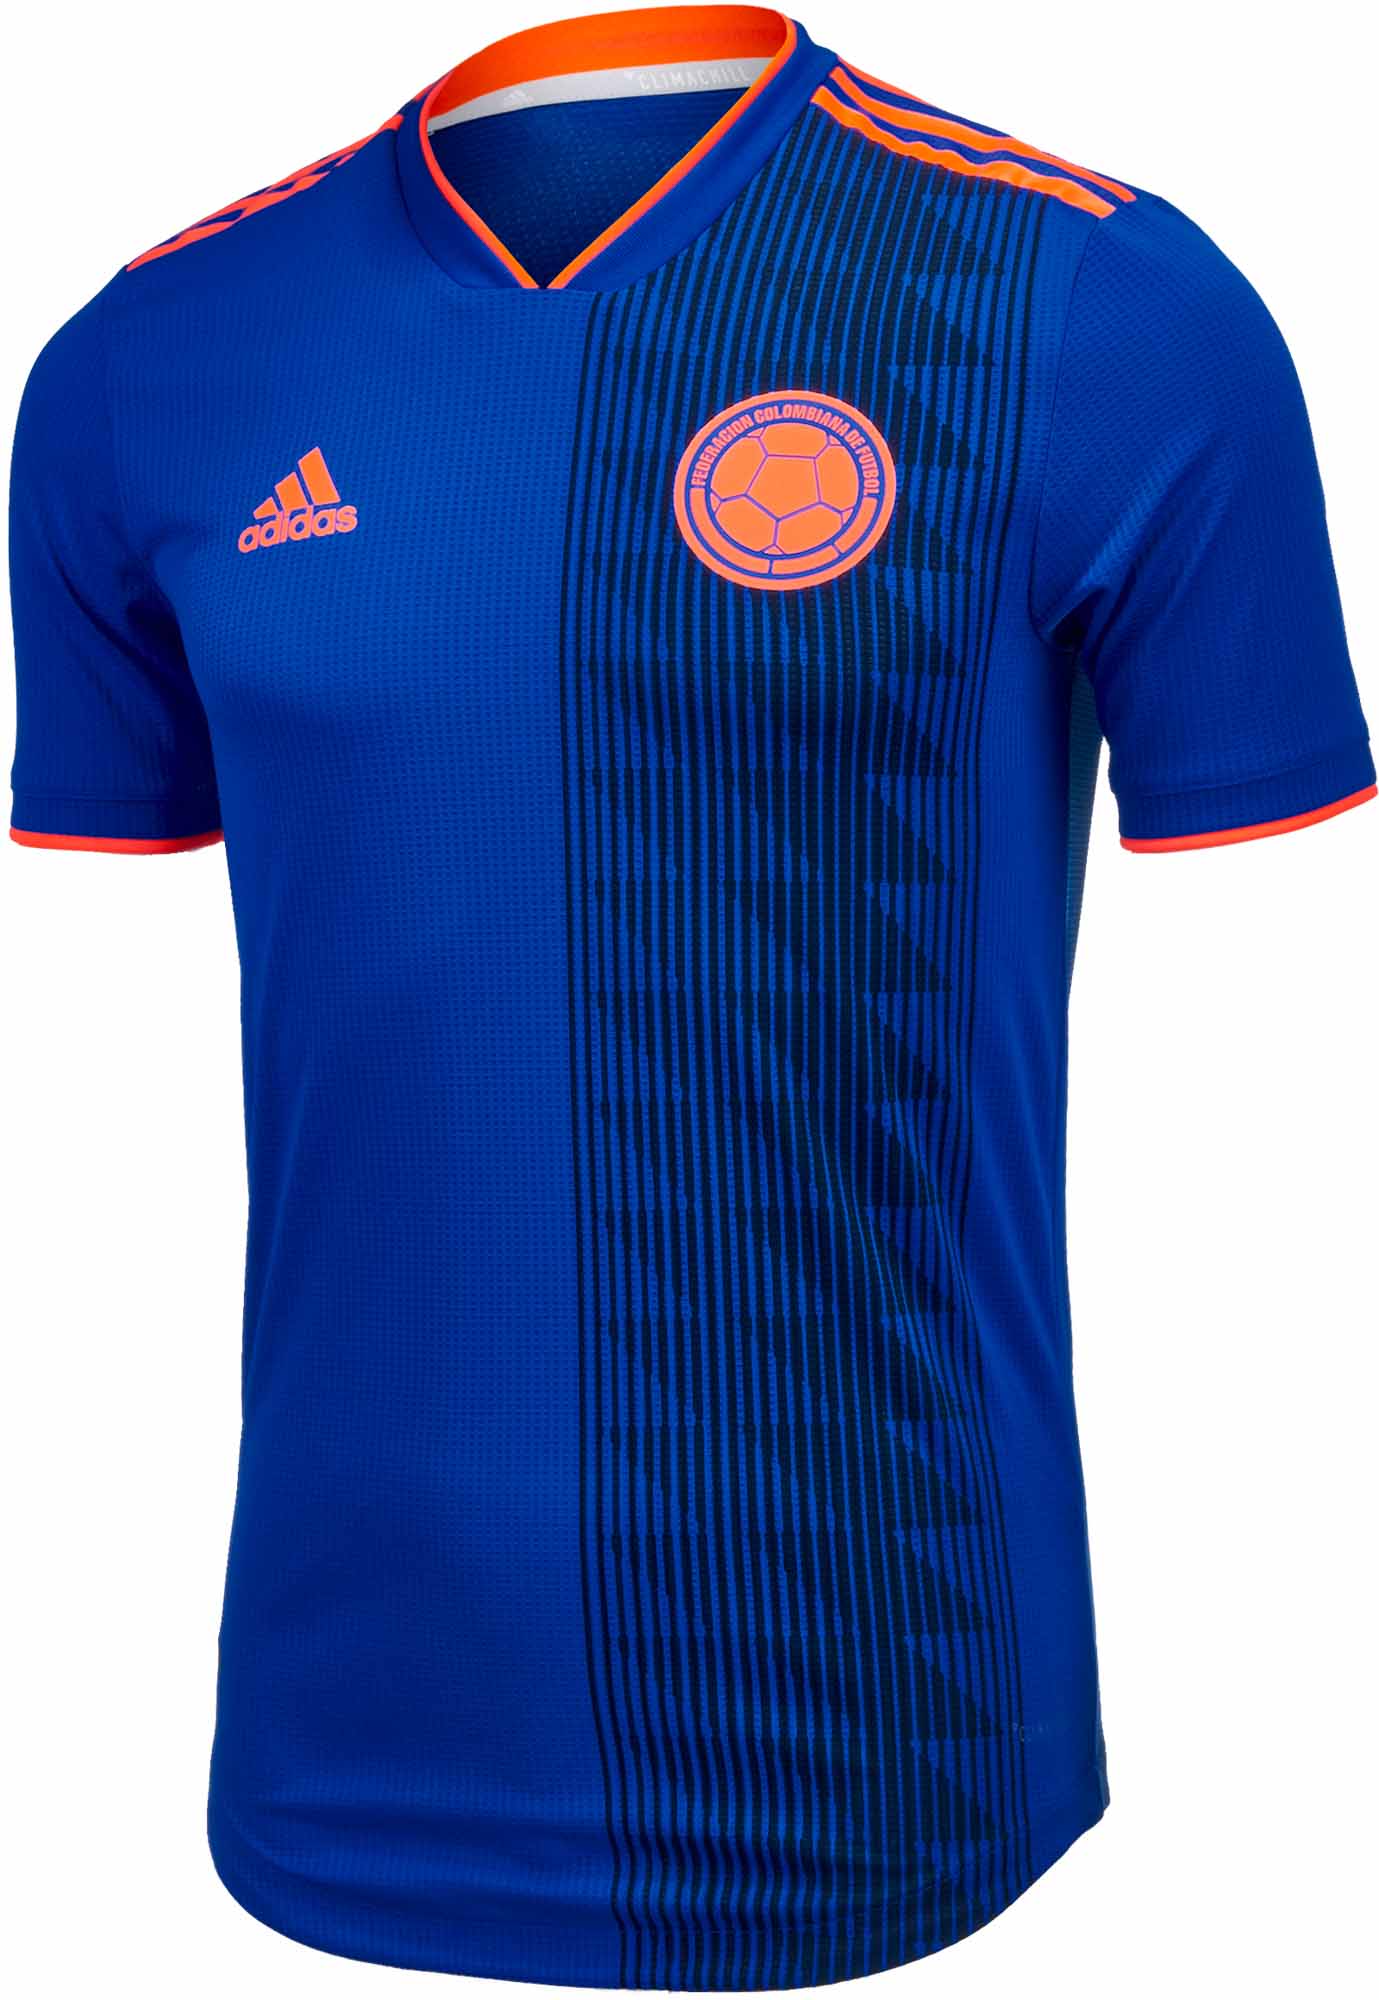 adidas colombia jersey womens 2018